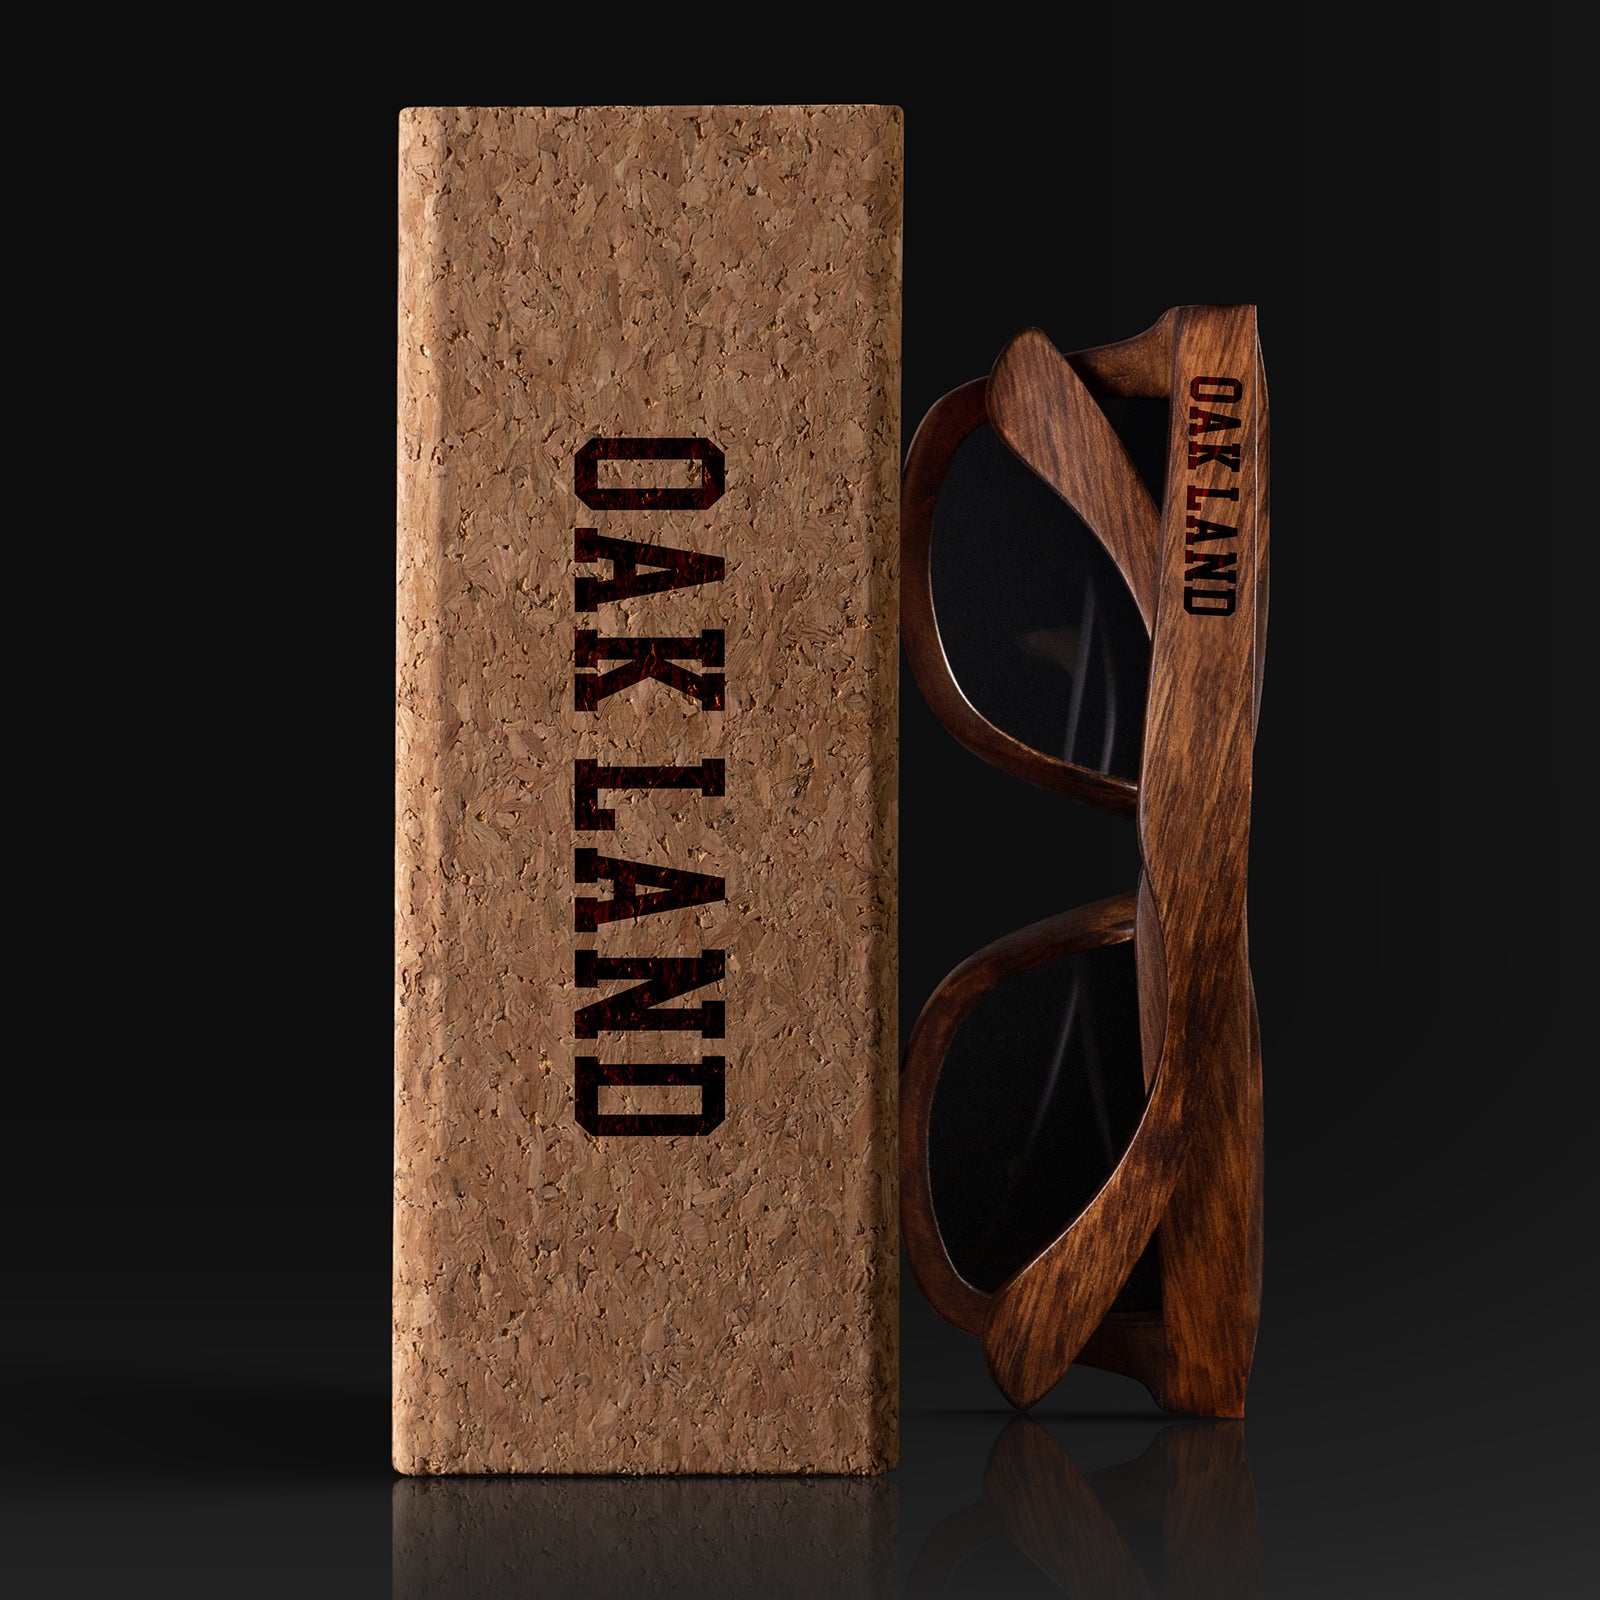 Oakland California III Wood Sunglasses with custom engraving. Custom Oakland California III Gifts For Men -  Sustainable Oakland California III eco friendly products - Personalized Oakland California III Birthday Gifts - Unique Oakland California III travel Souvenirs and gift shops. Oakland California III Wayfarer Eyewear and Shades wiith Box